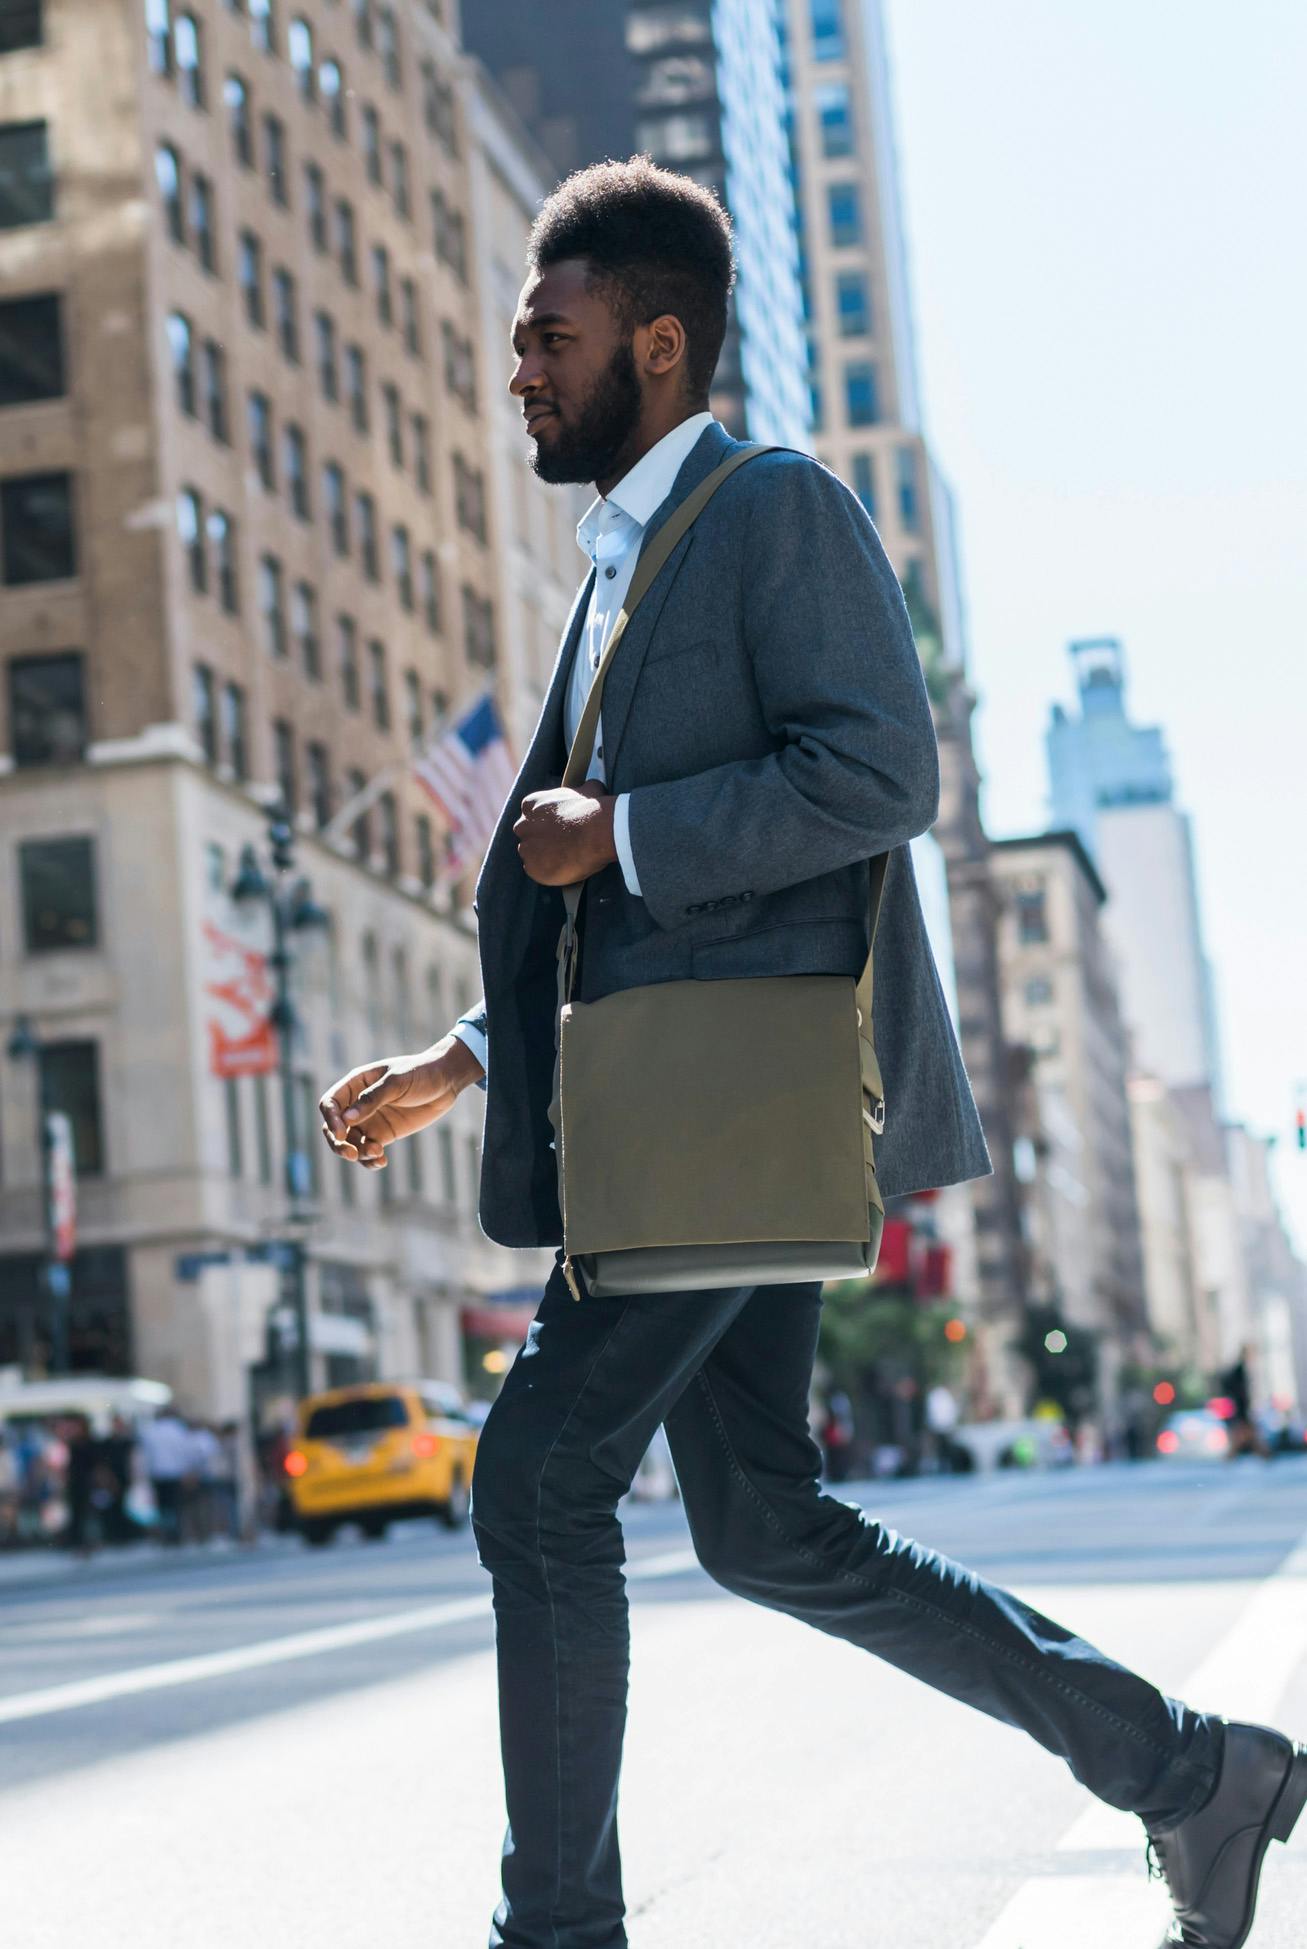 Black man in sports coat and jeans with work bag on shoulder, confidently walking down a Manhattan street